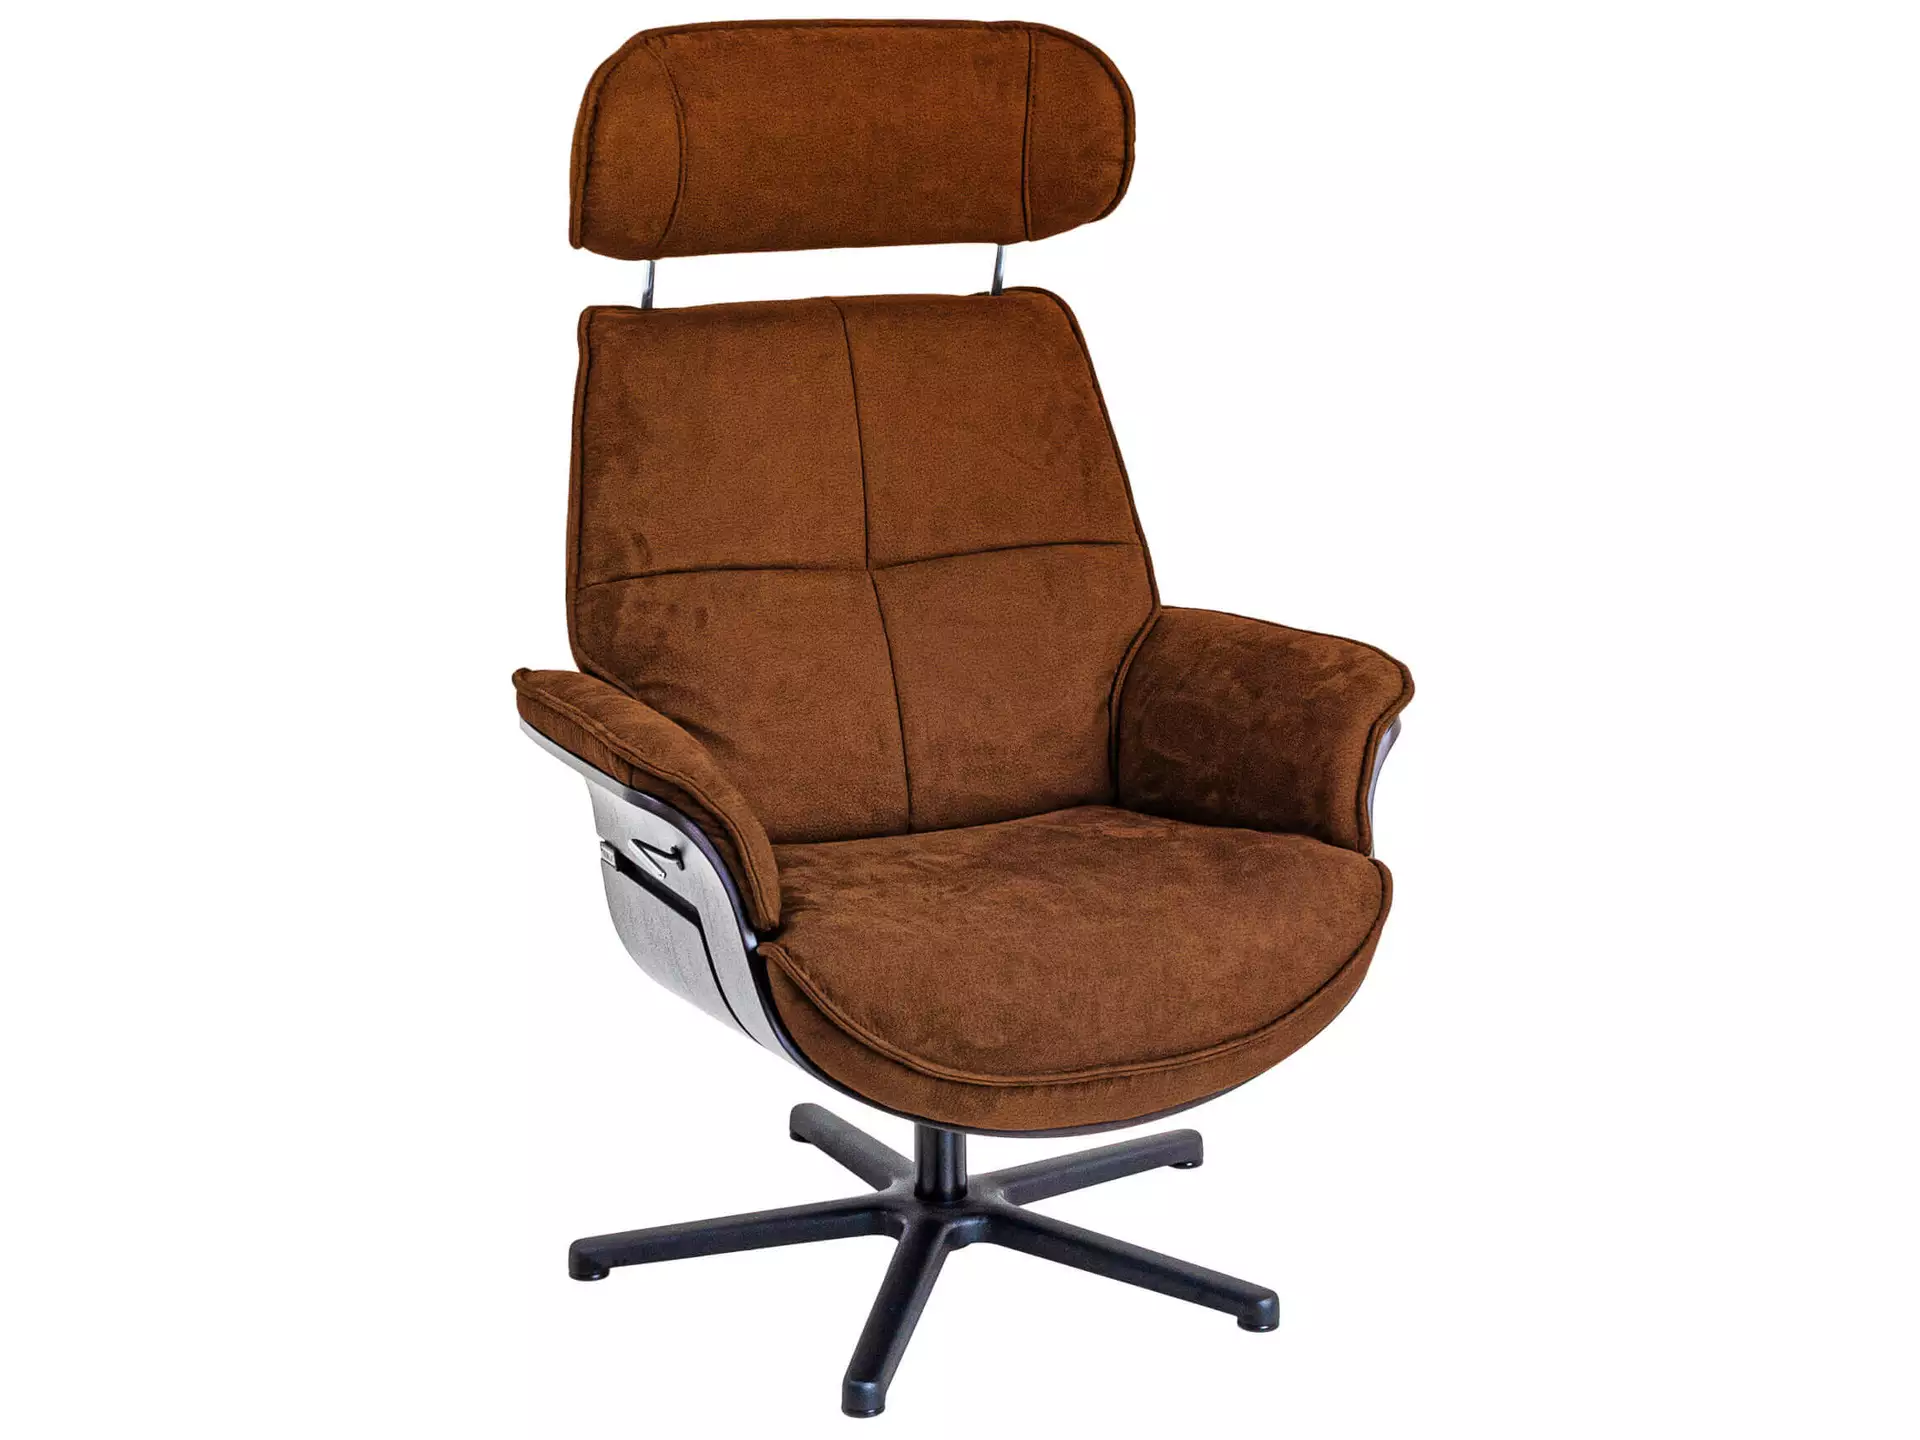 Relaxer Curacao Eiche Dunkel Basic Polipol / Farbe: Zimt / Material: Stoff Basic